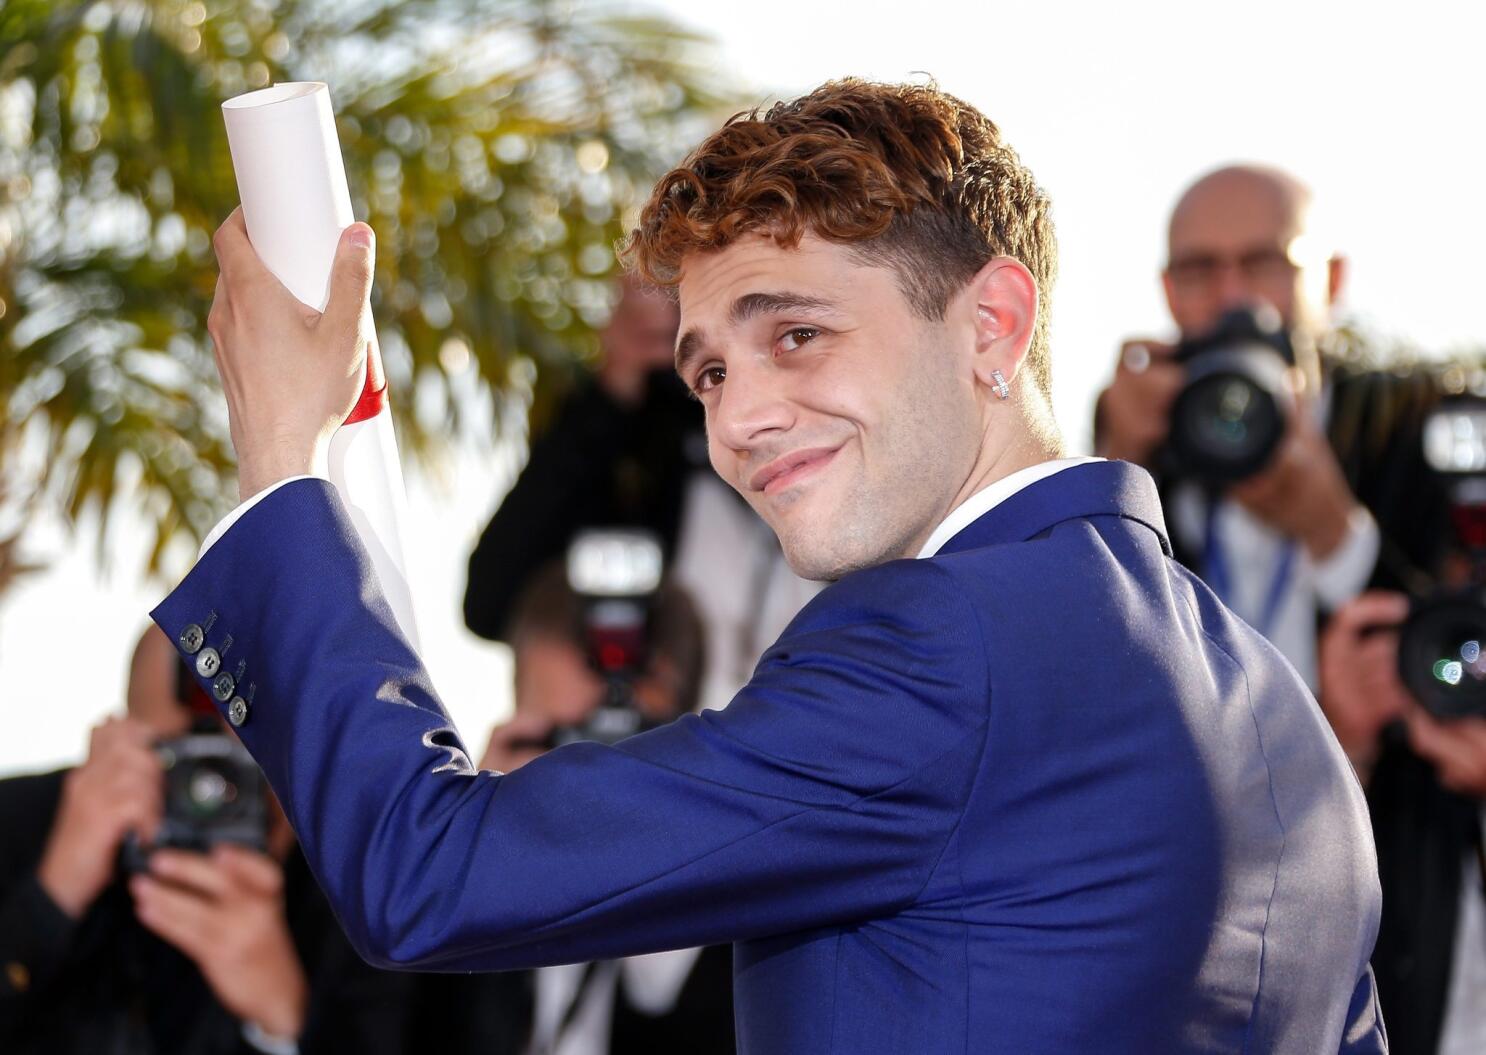 Director Xavier Dolan poses for photographers at the See The World